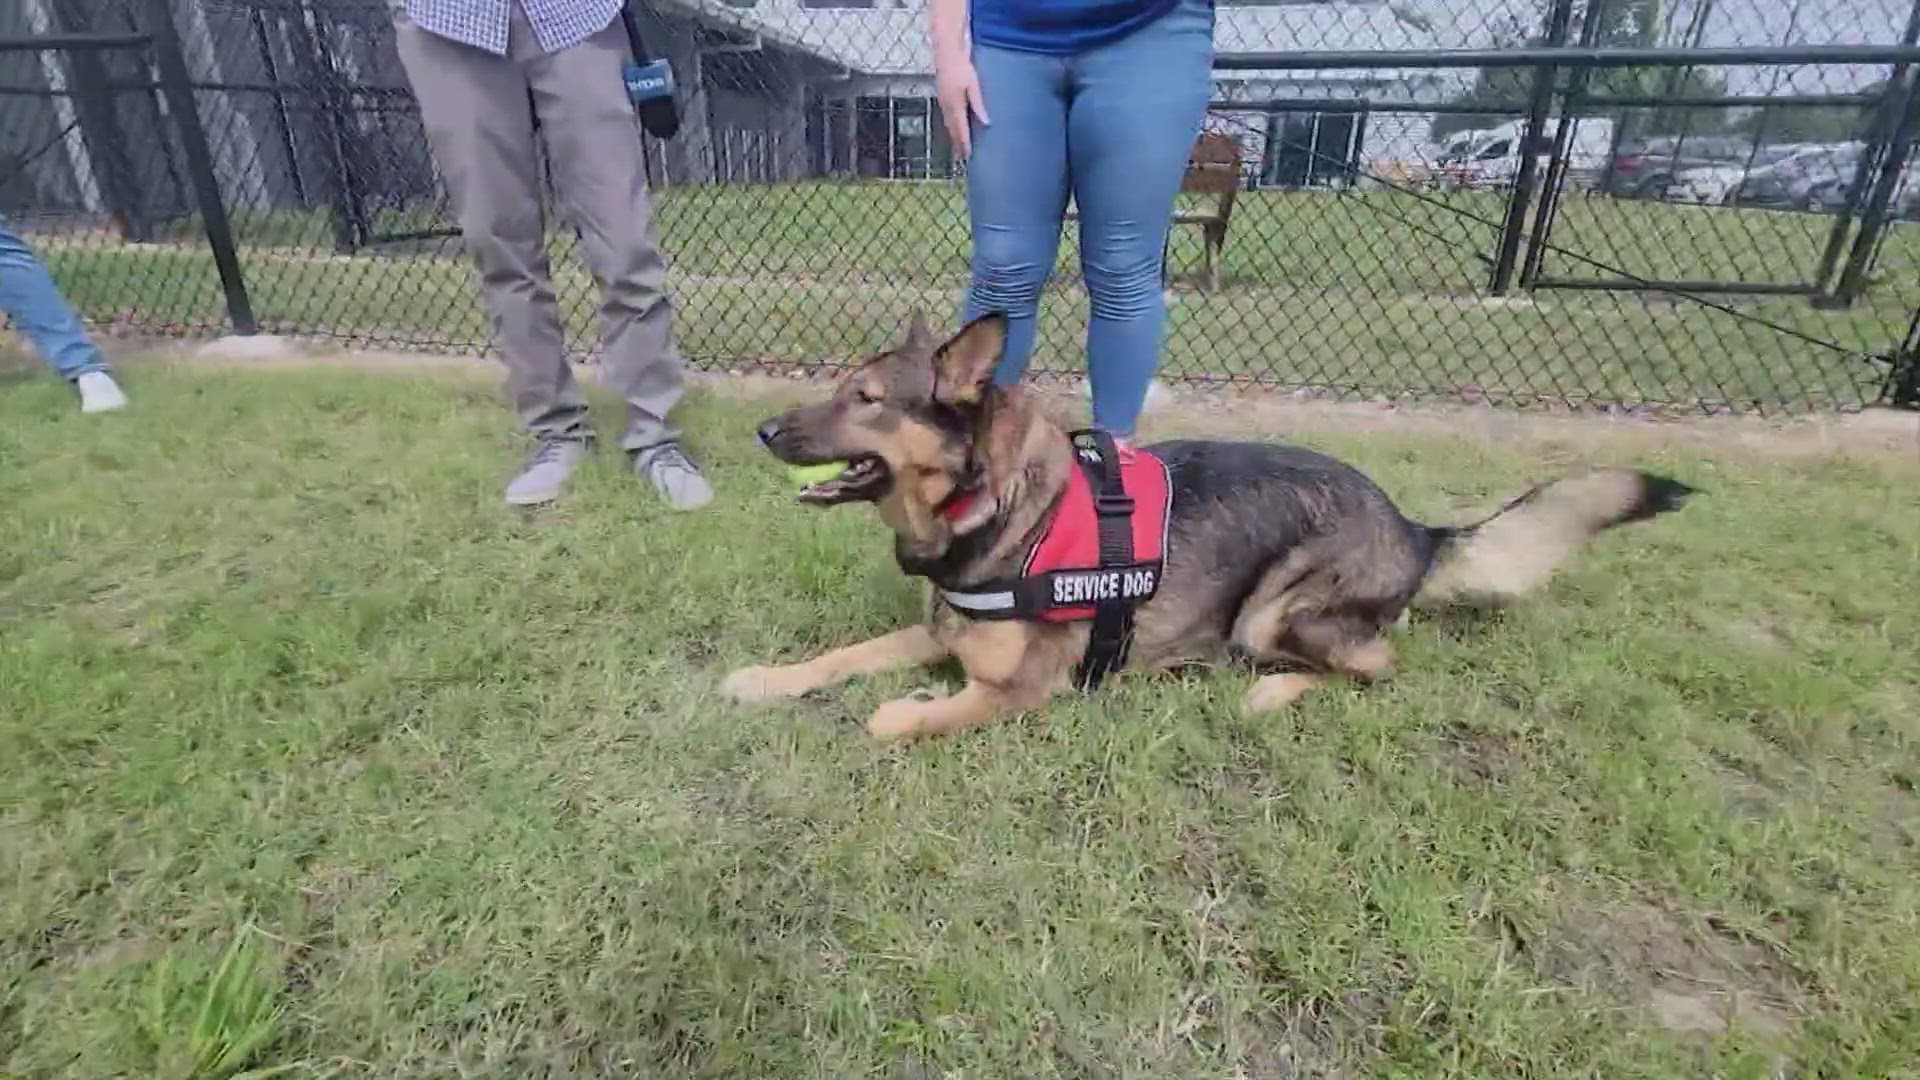 The 2-year-old German shepherd that was found alone at George Bush Park was reunited with its owner.